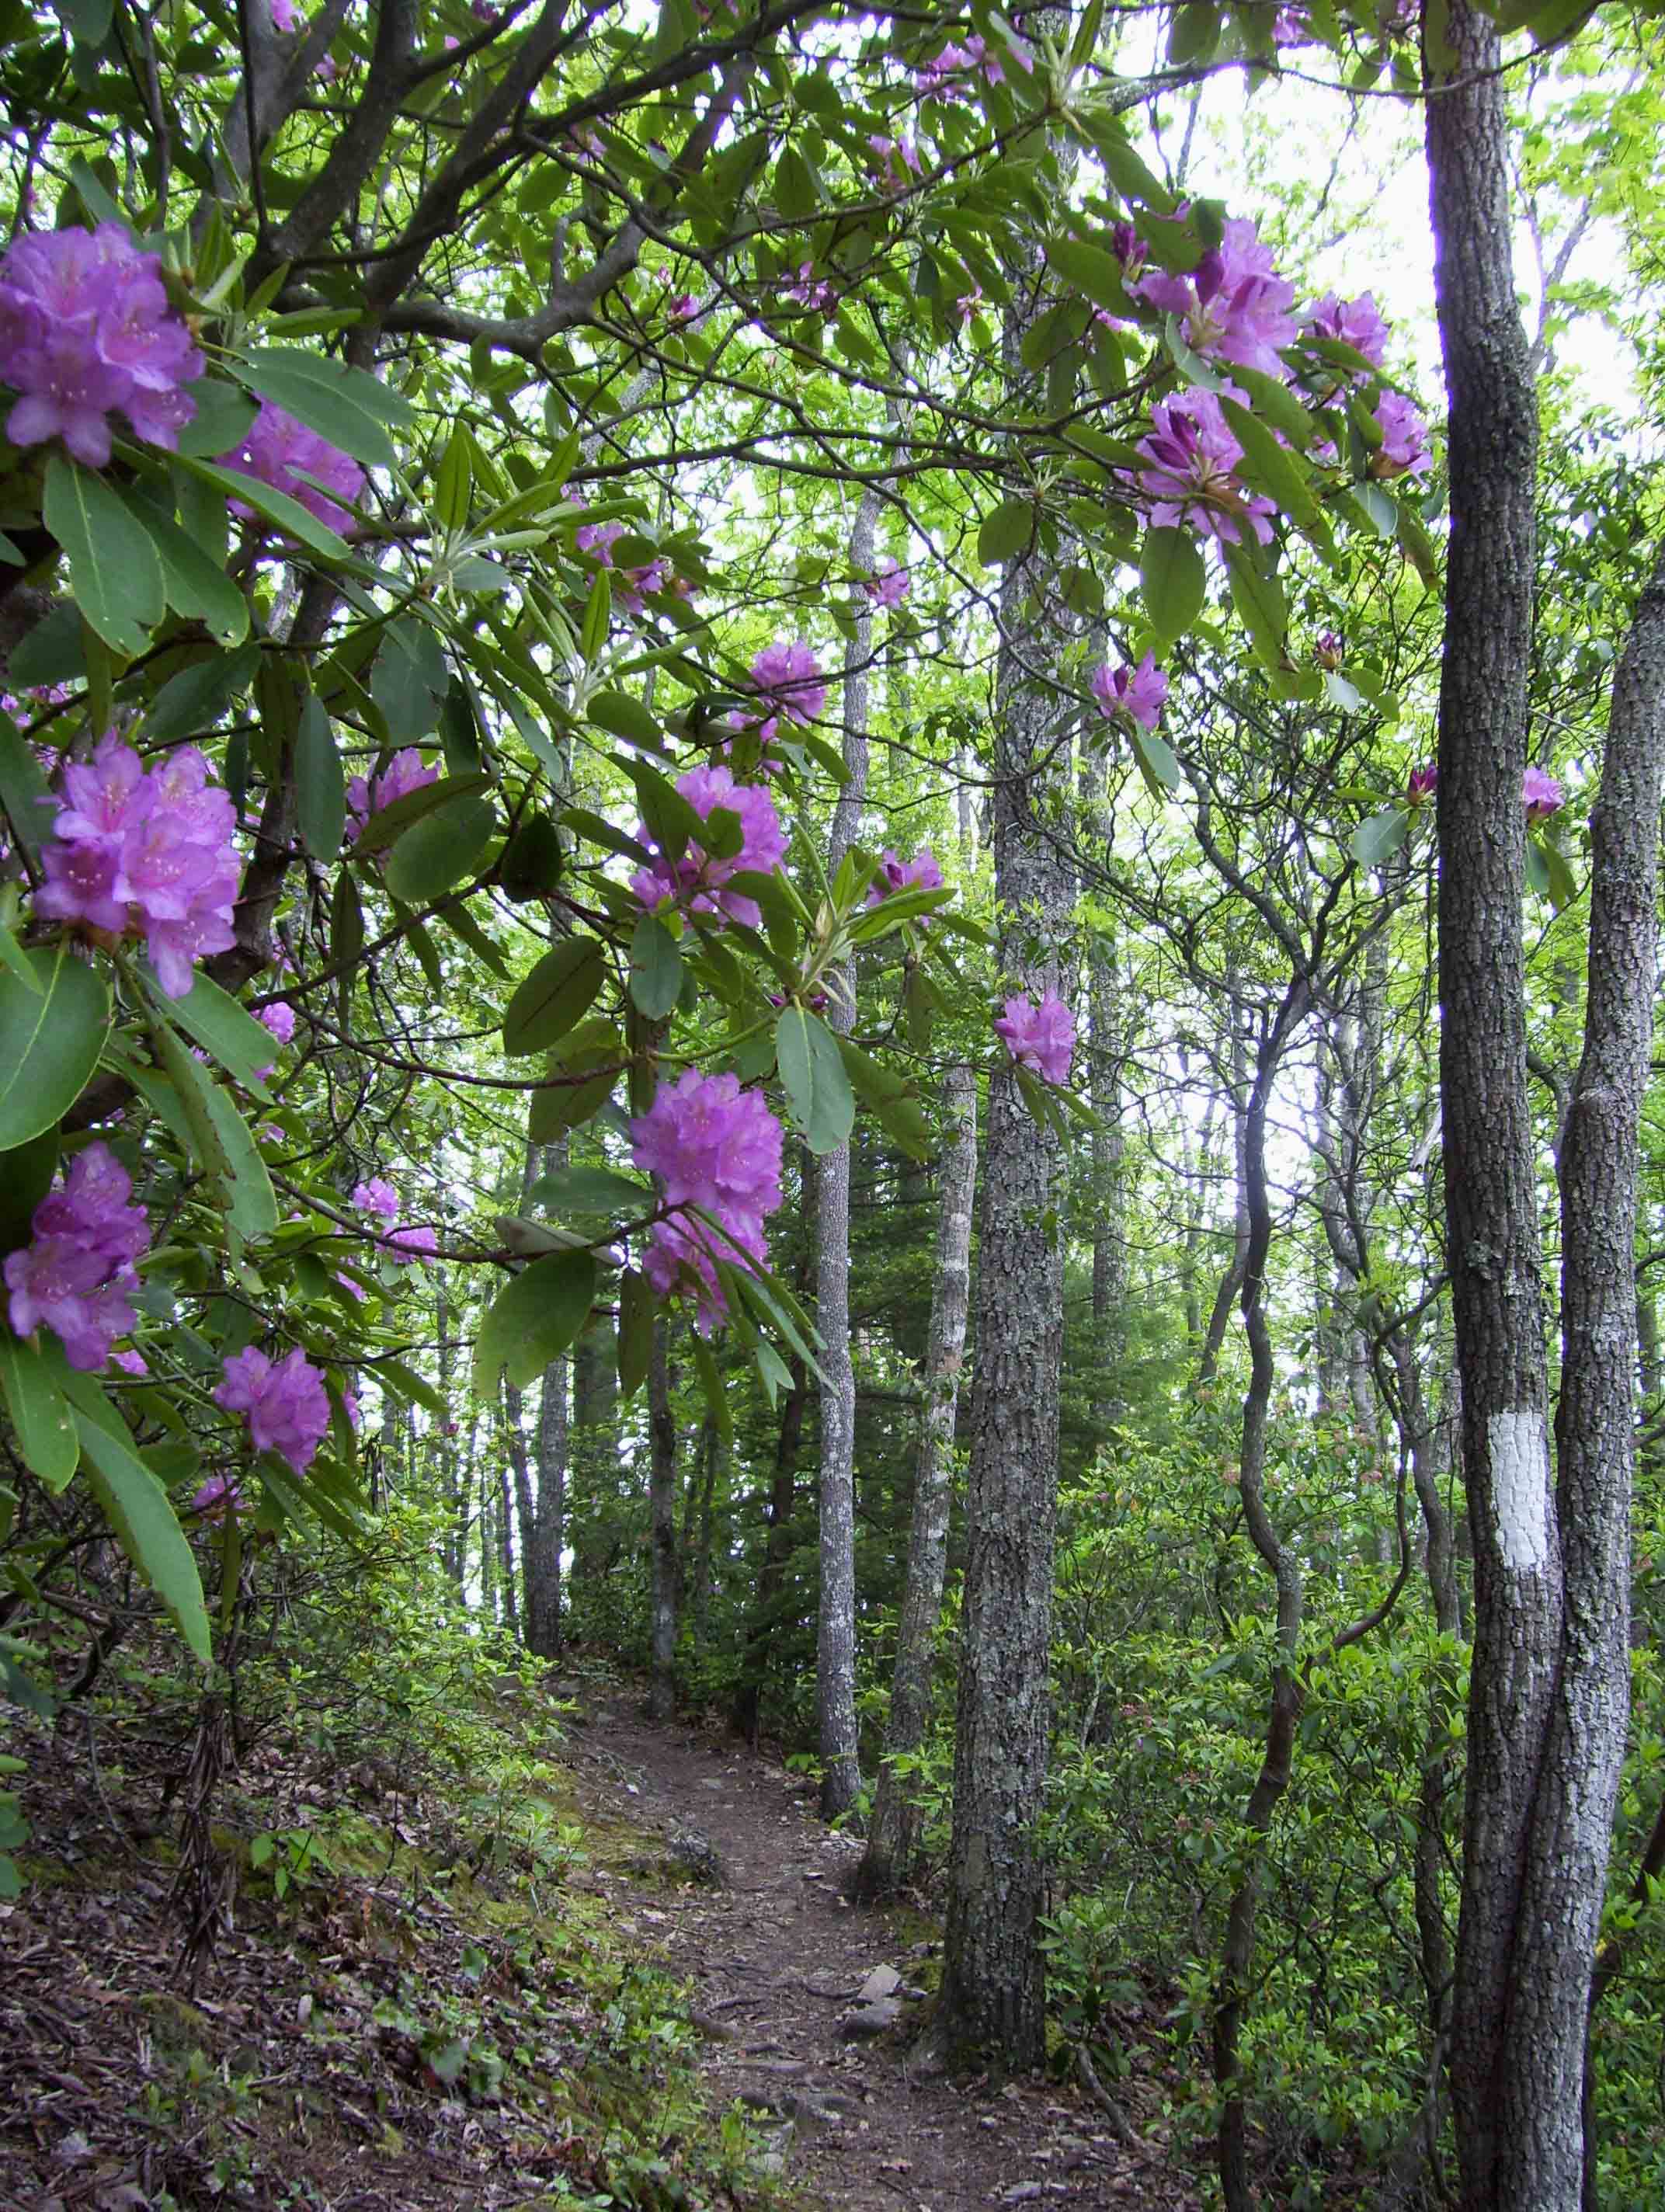 Rhododendrons along trail. Taken at approx. MM 6.8.  Courtesy dlcul@conncoll.edu